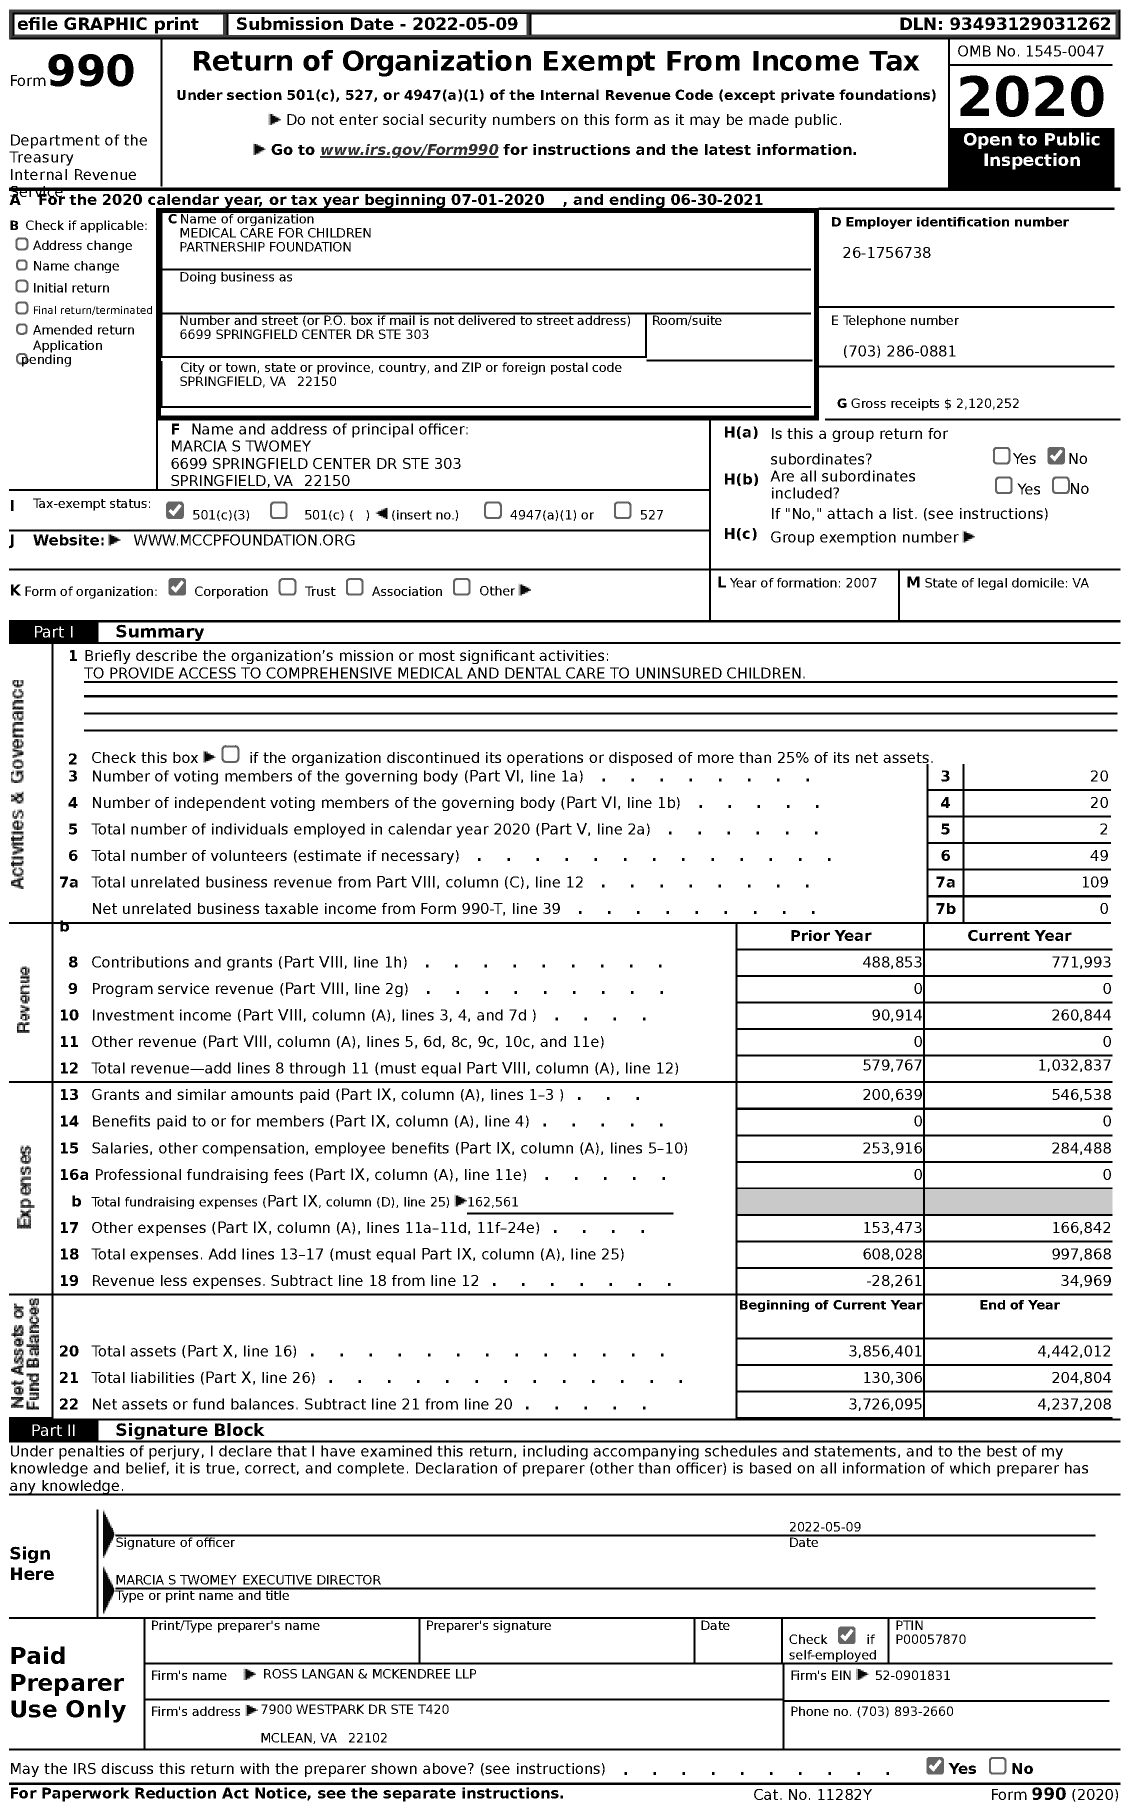 Image of first page of 2020 Form 990 for Medical Care for Children Partnership Partnership Foundation